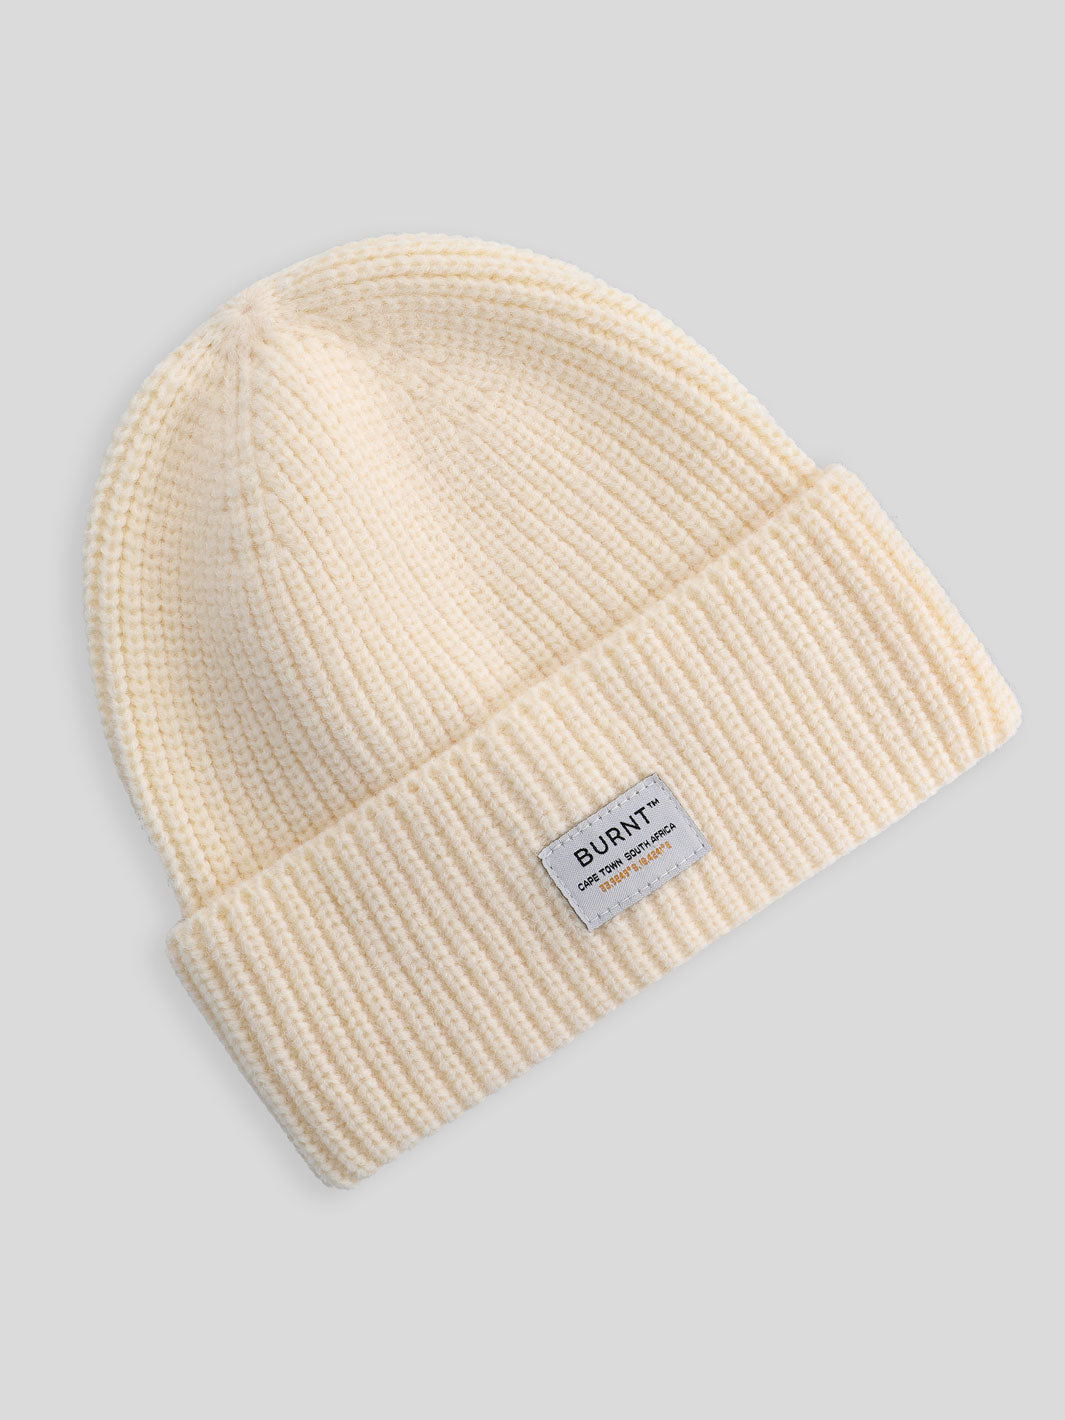 Moscow Beanie in cream - front view